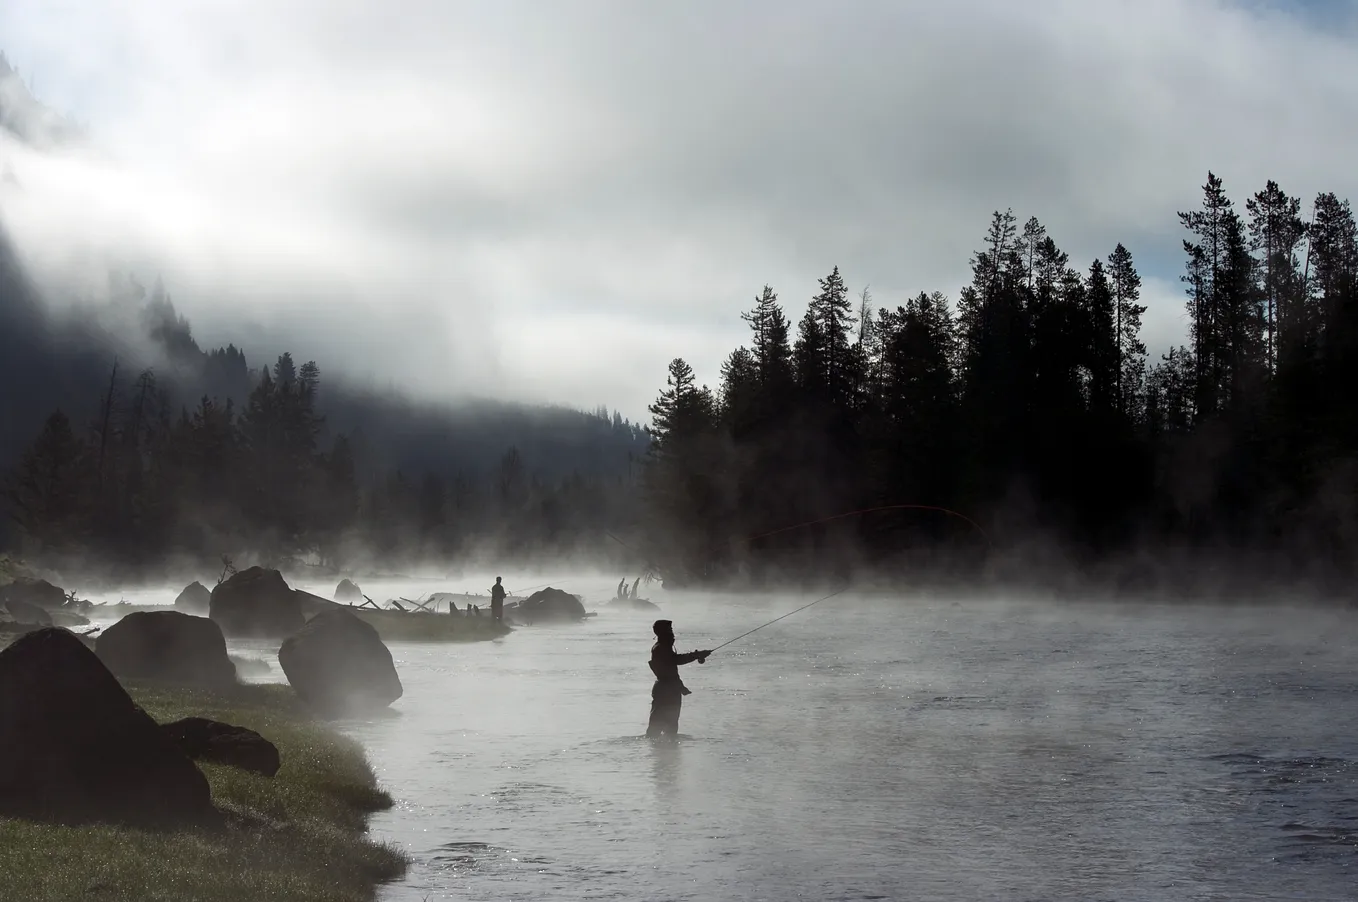 Black and white photo of a man fly fishing on a mist-covered river at sunrise.